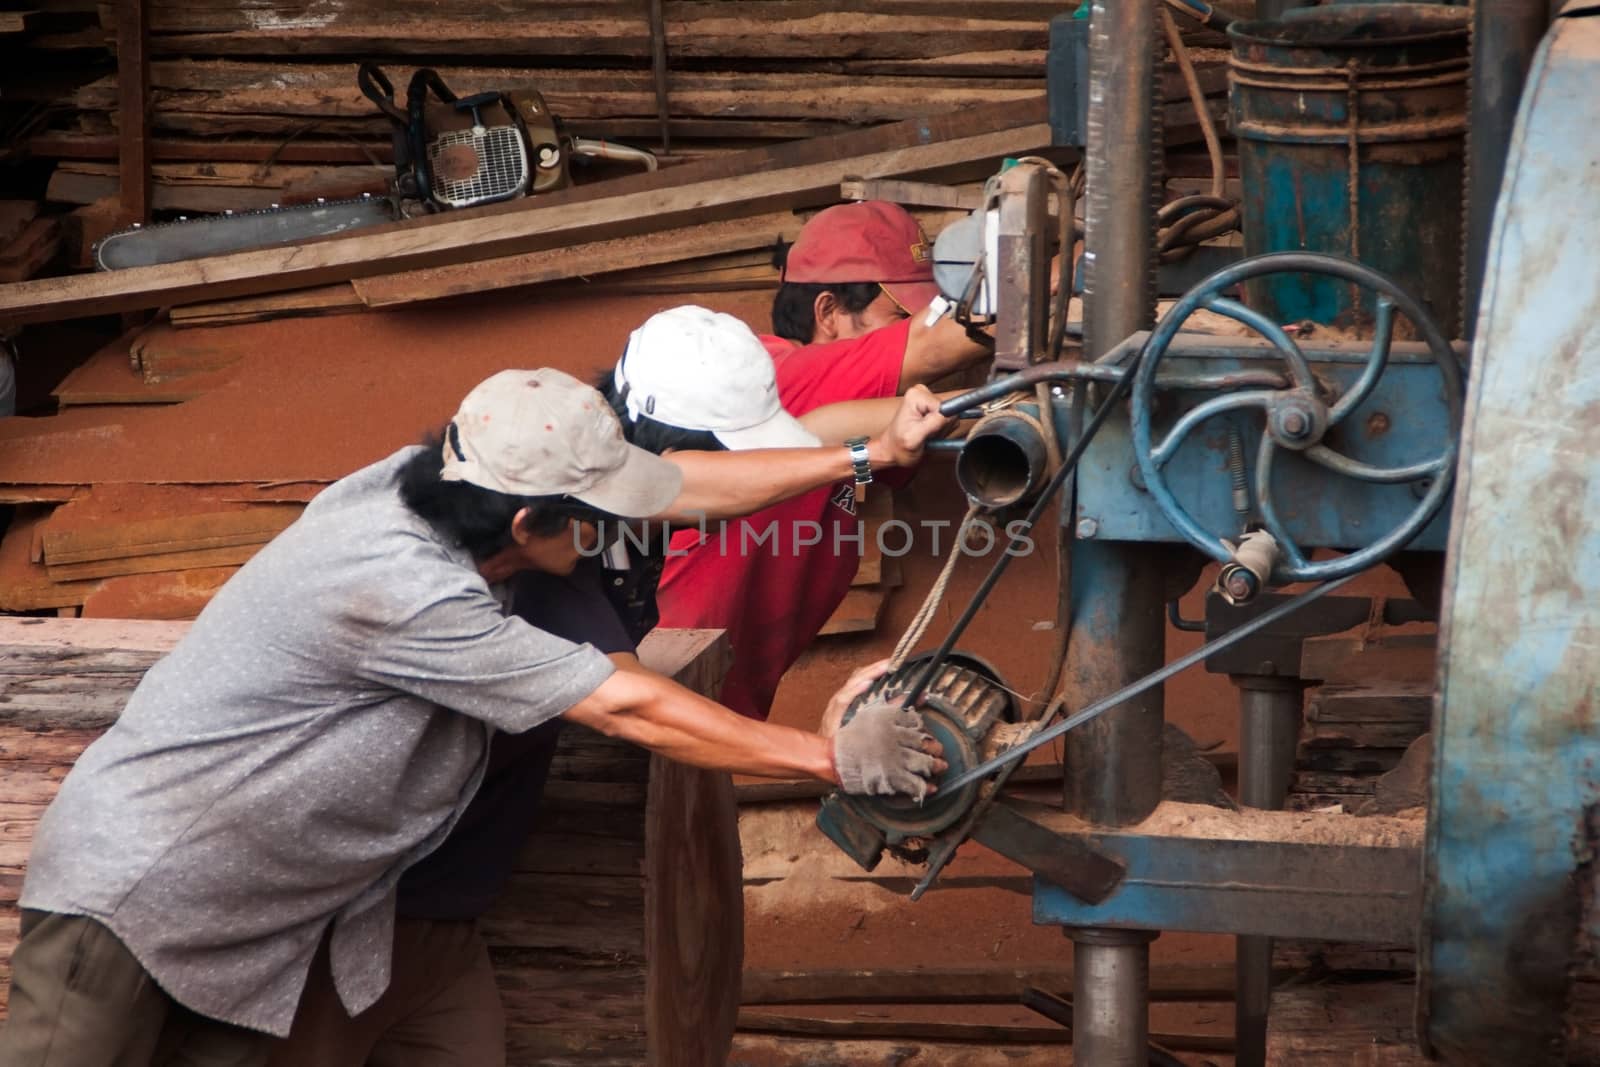 Quy, Nhon, viet Nam: Three woodworker try to push cumbersome machine to split section of a tree trunk into plank at sawmill. Vietnam, June 18, 2012